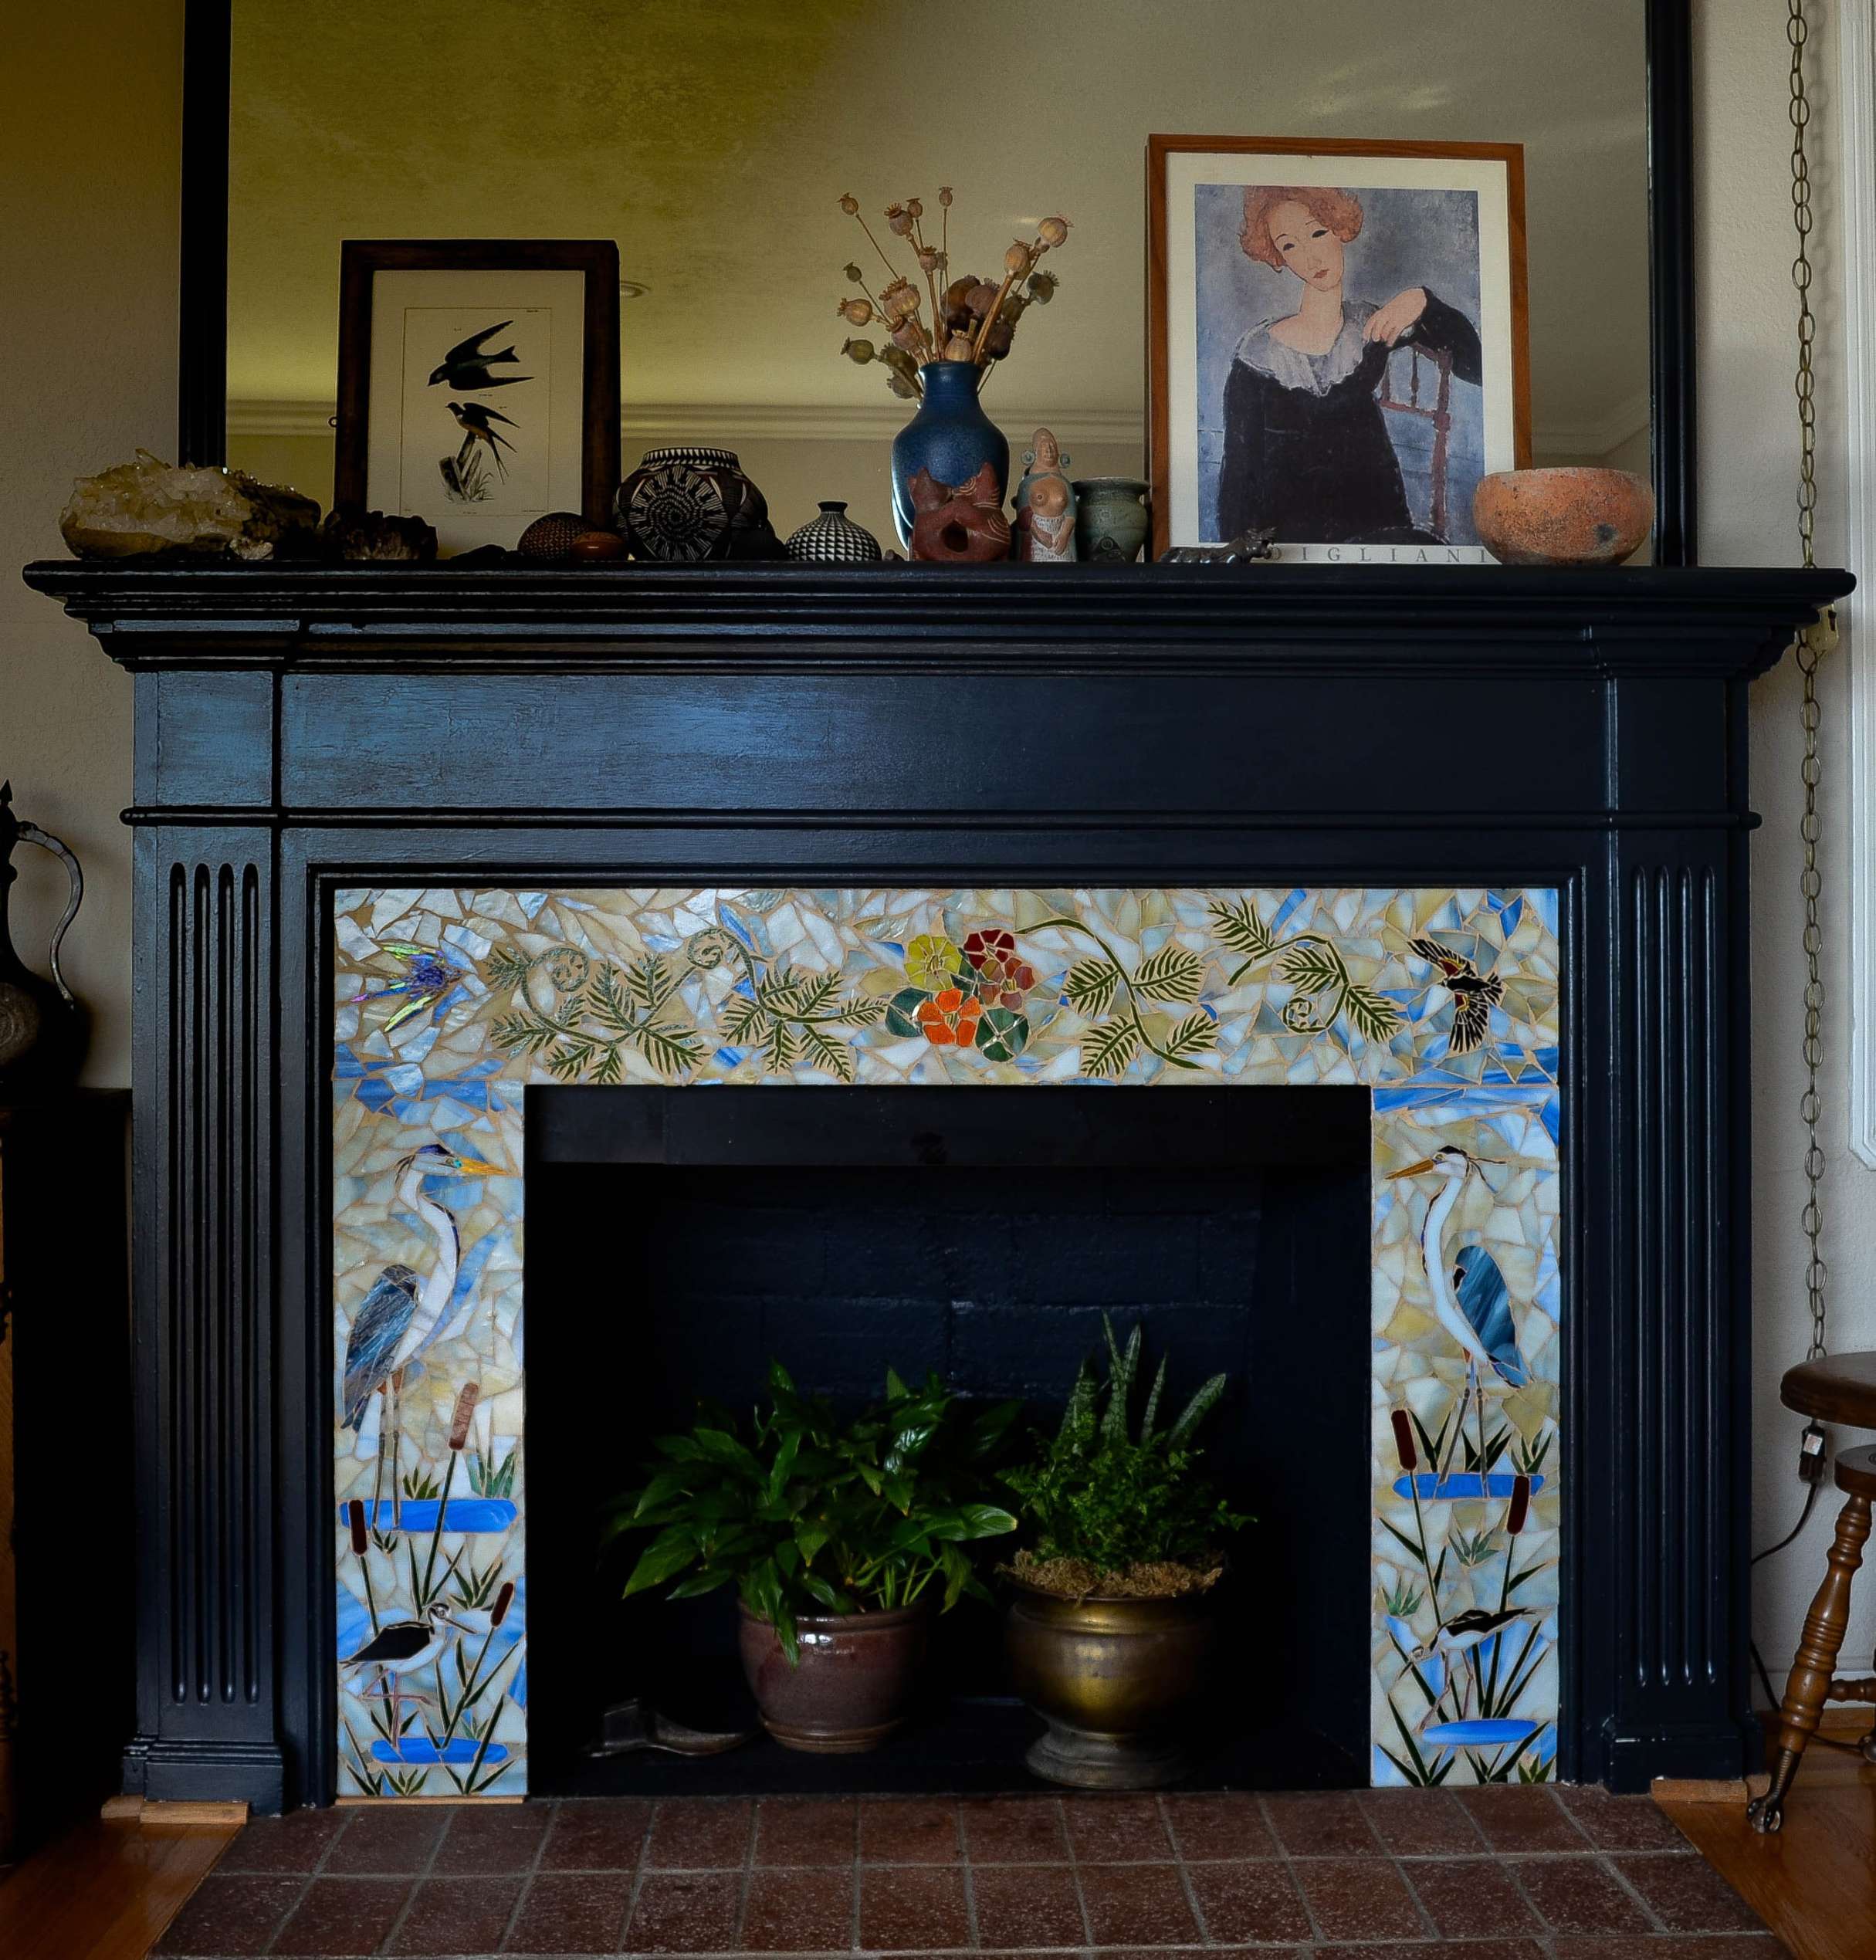 CUSTOM Fireplace Surround Mosaic you customize your own design and